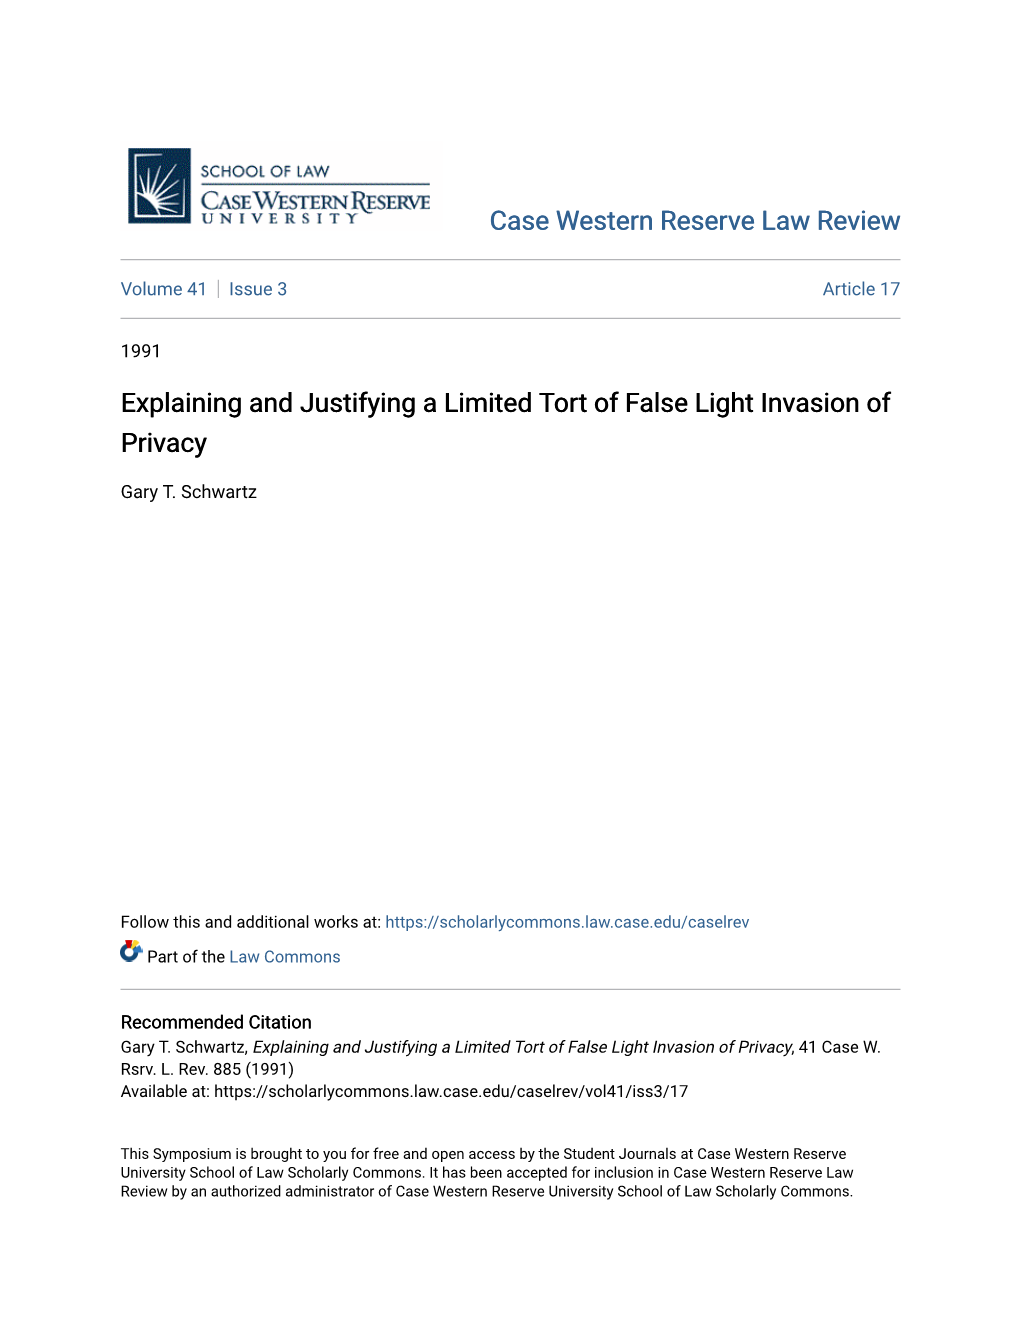 Explaining and Justifying a Limited Tort of False Light Invasion of Privacy